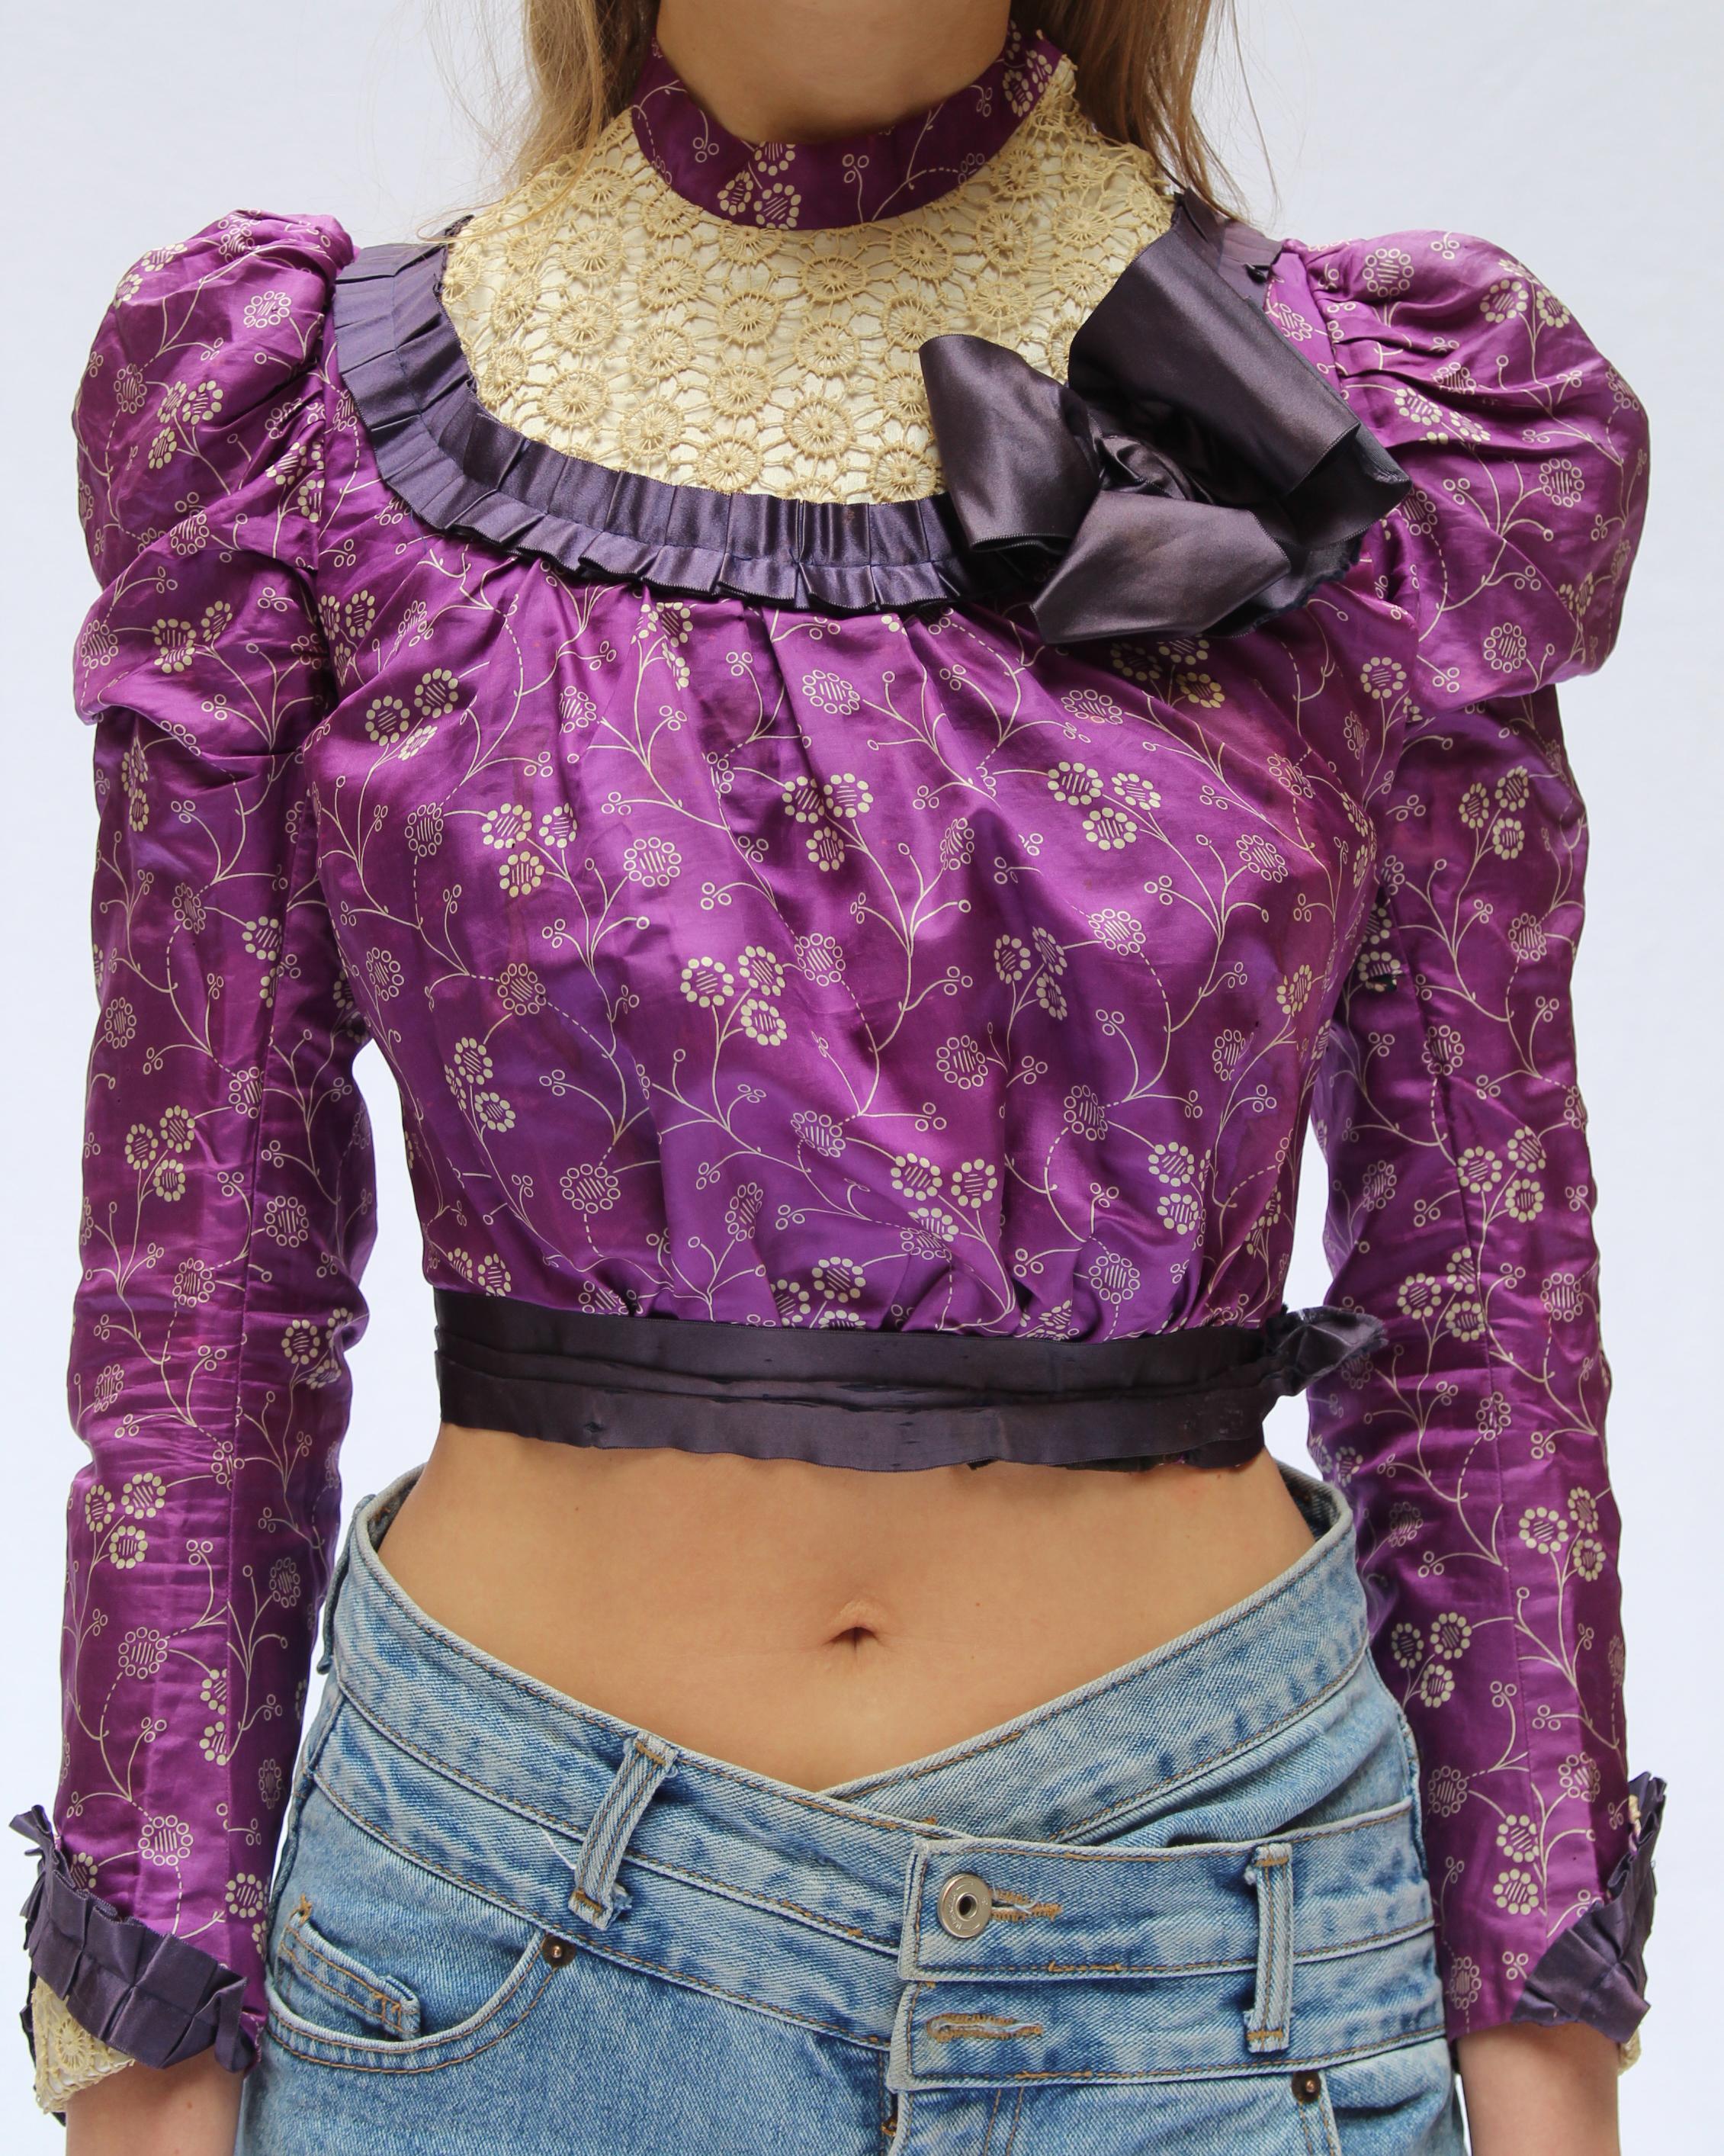 Antique Victorian clothing is rare enough to come by, and this blouse is such a special collector's item. Circa 1890s, it's made of the most beautiful printed silk, with solid purple silk details, and crochet lace details at the chest and cuffs—